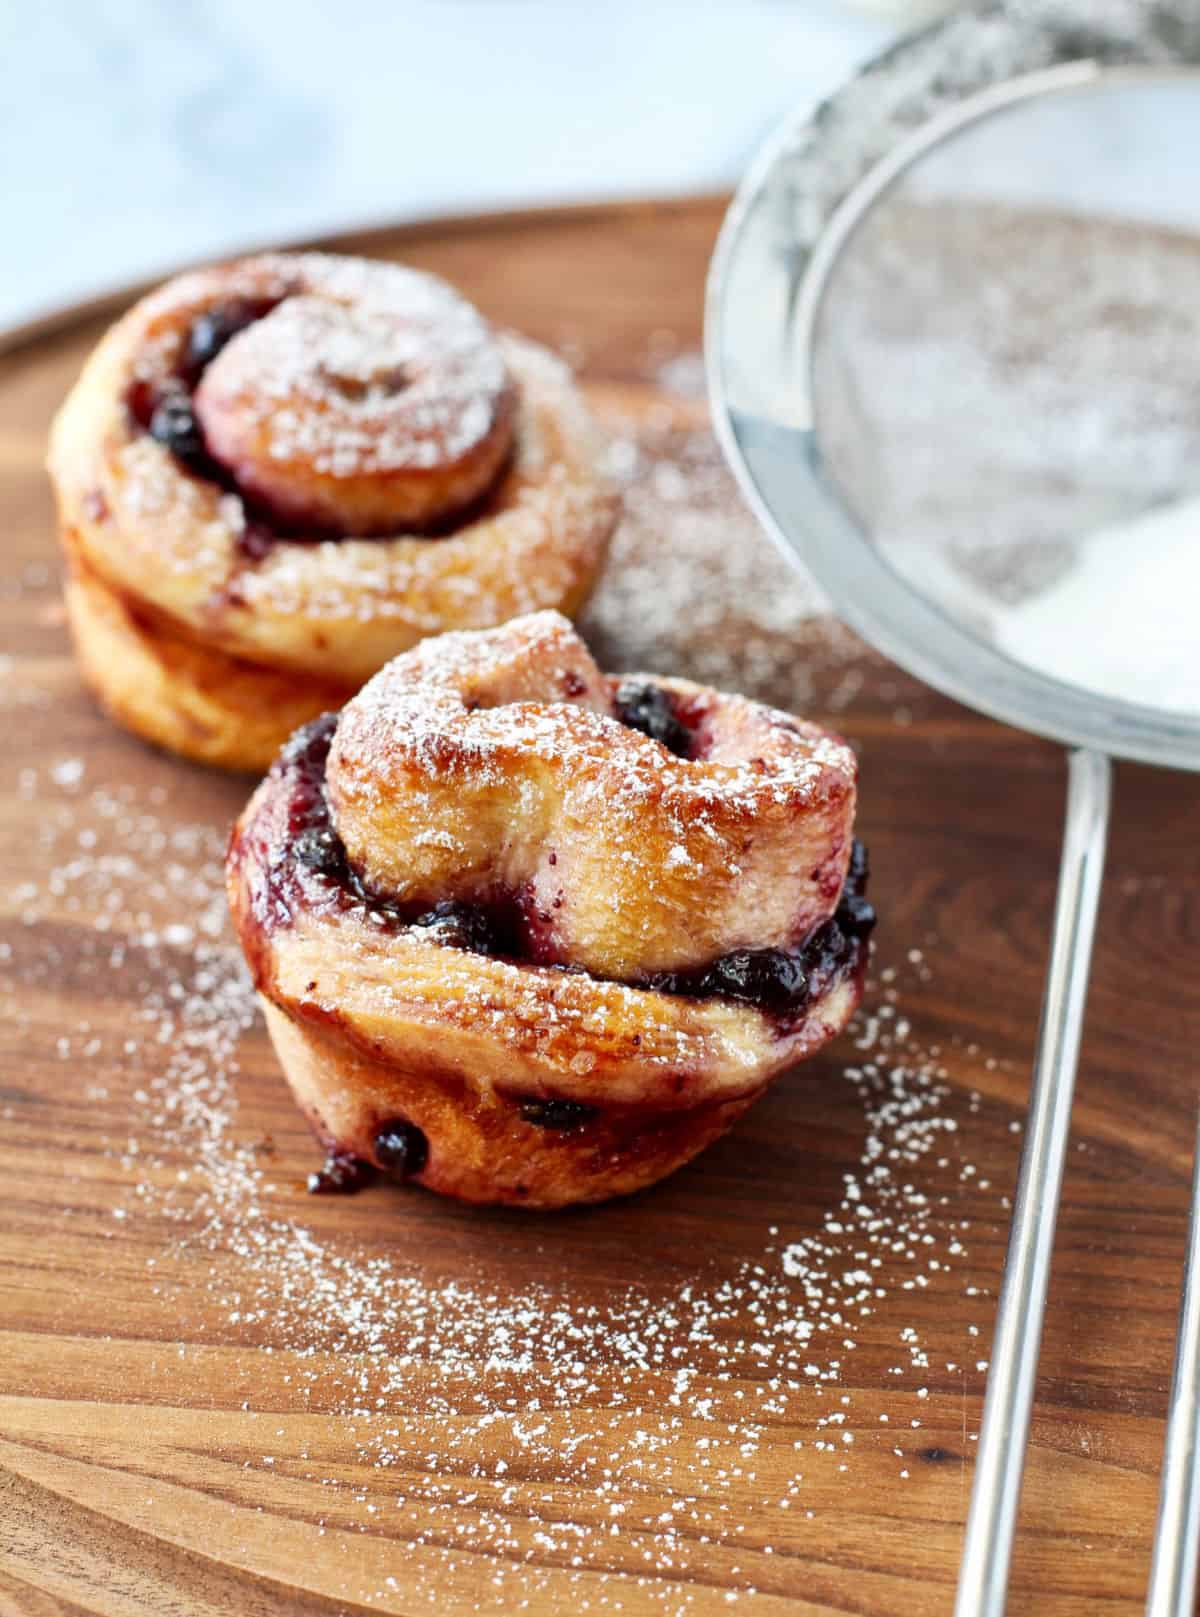 Pomegranate and Blueberry Jam Milk Buns on a wooden board.